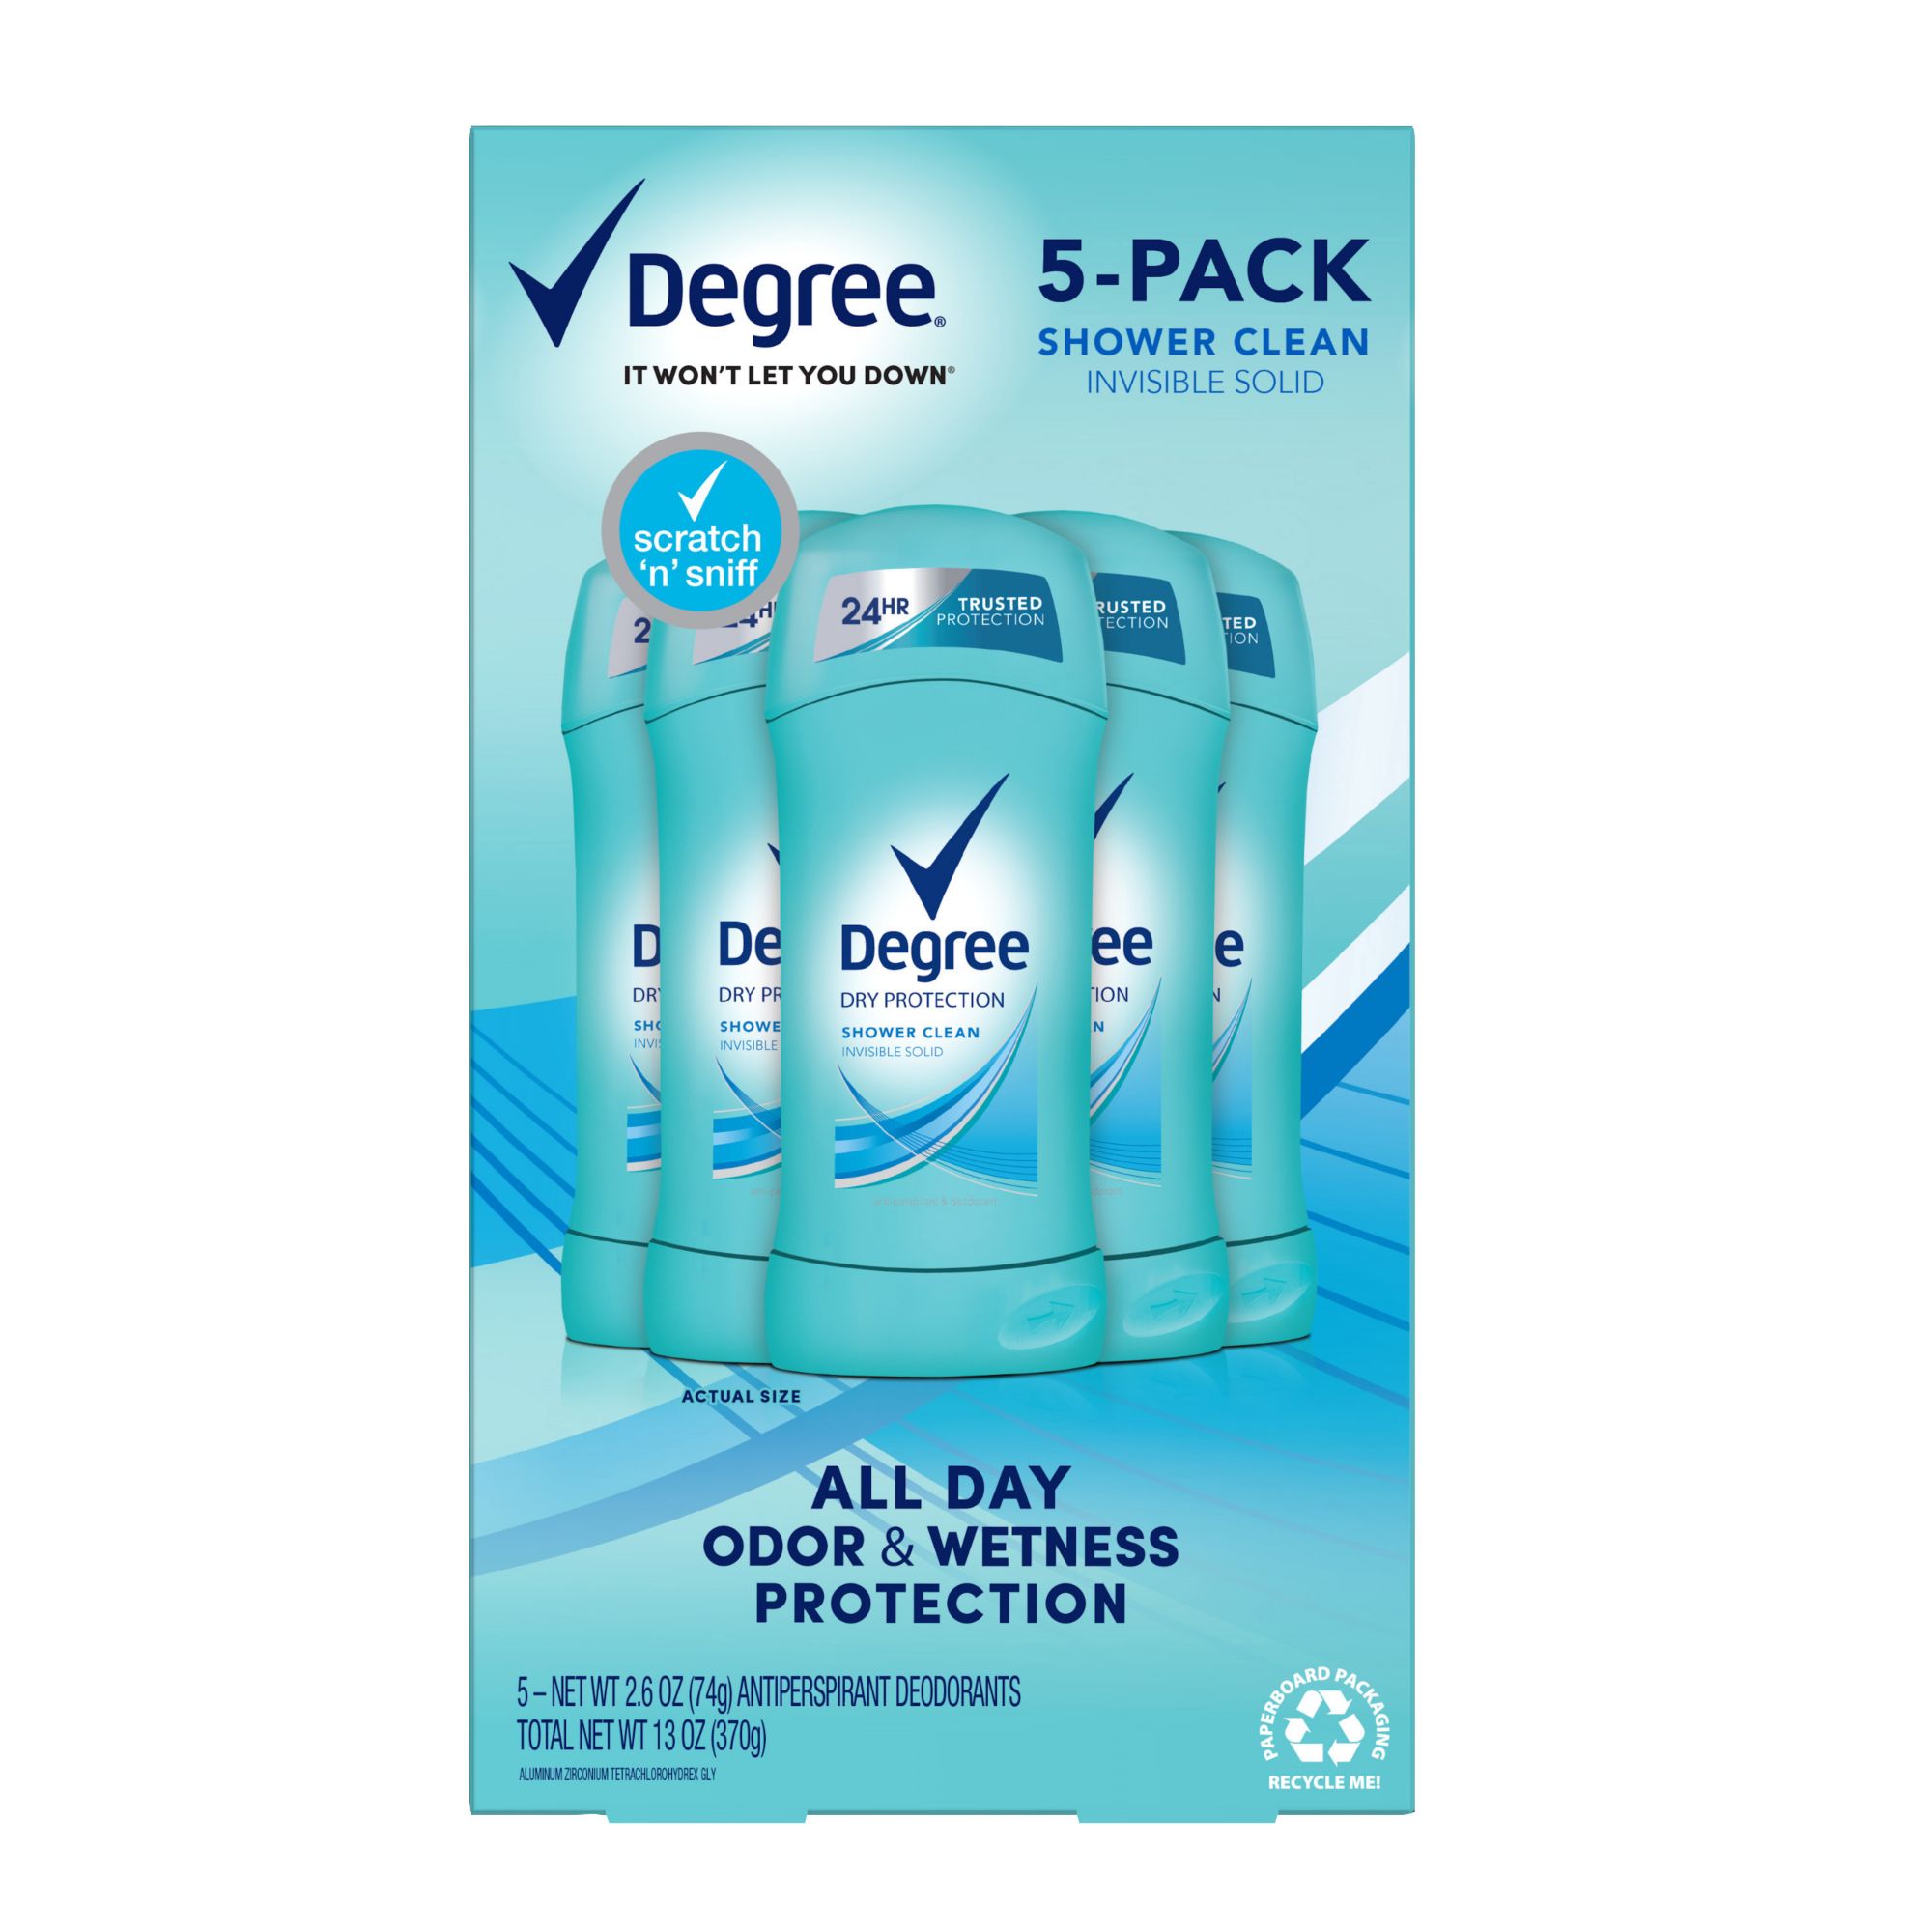 Degree Women's Shower Clean Dry Protection Deodorant, 5 pk.